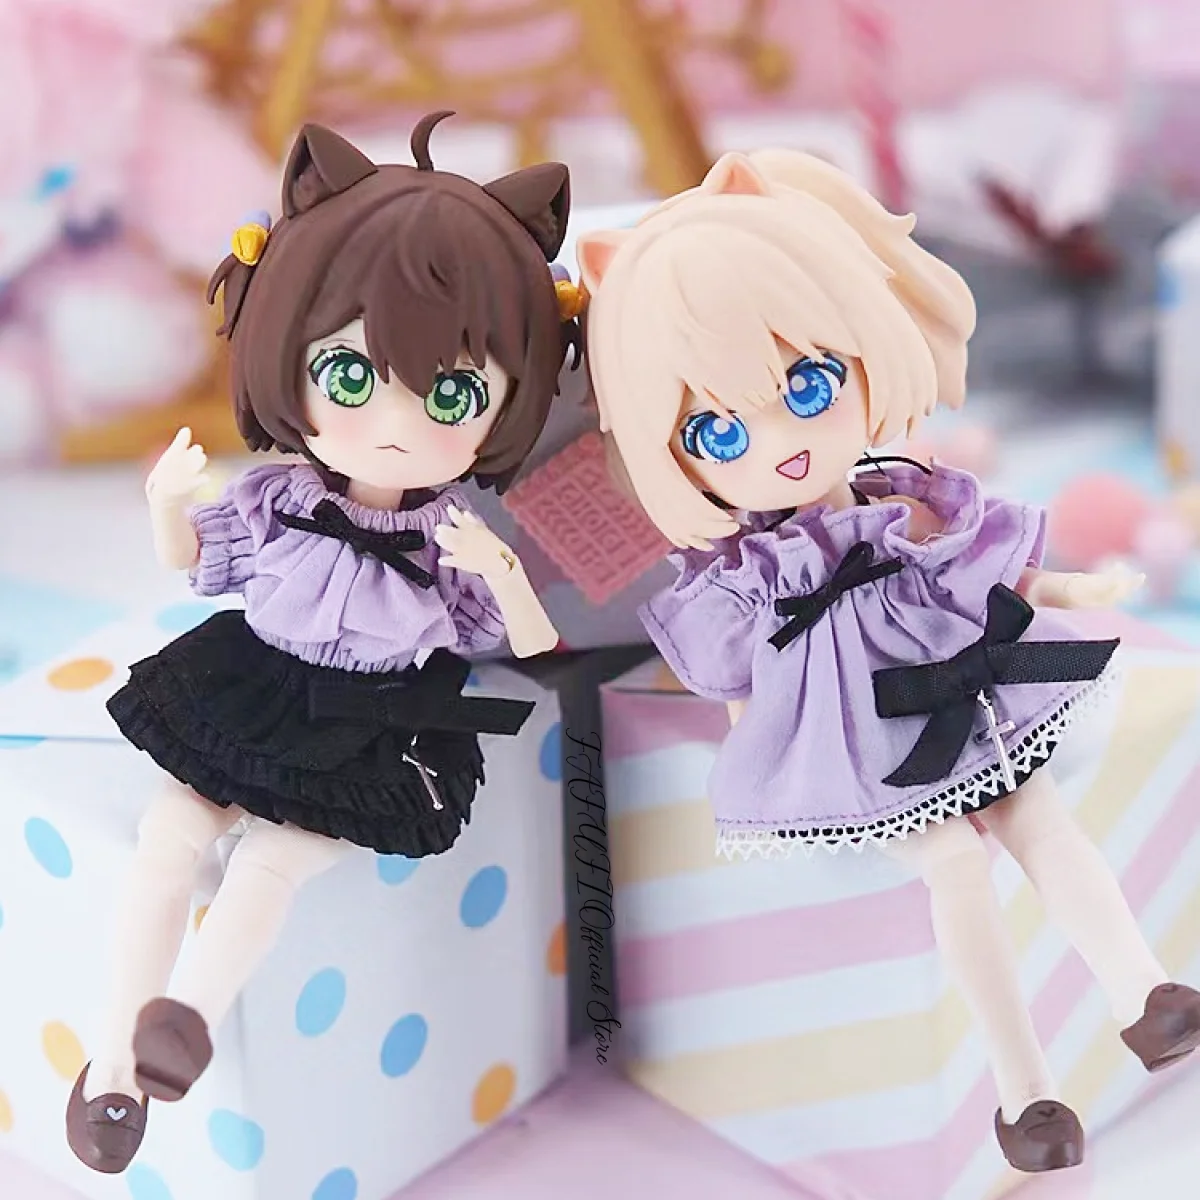 Ufdoll Miao Series Bjd Movable Doll Blind Box Guess Bag Mystery Box Toys Doll Anime Figure Desktop Ornaments Gift Collection